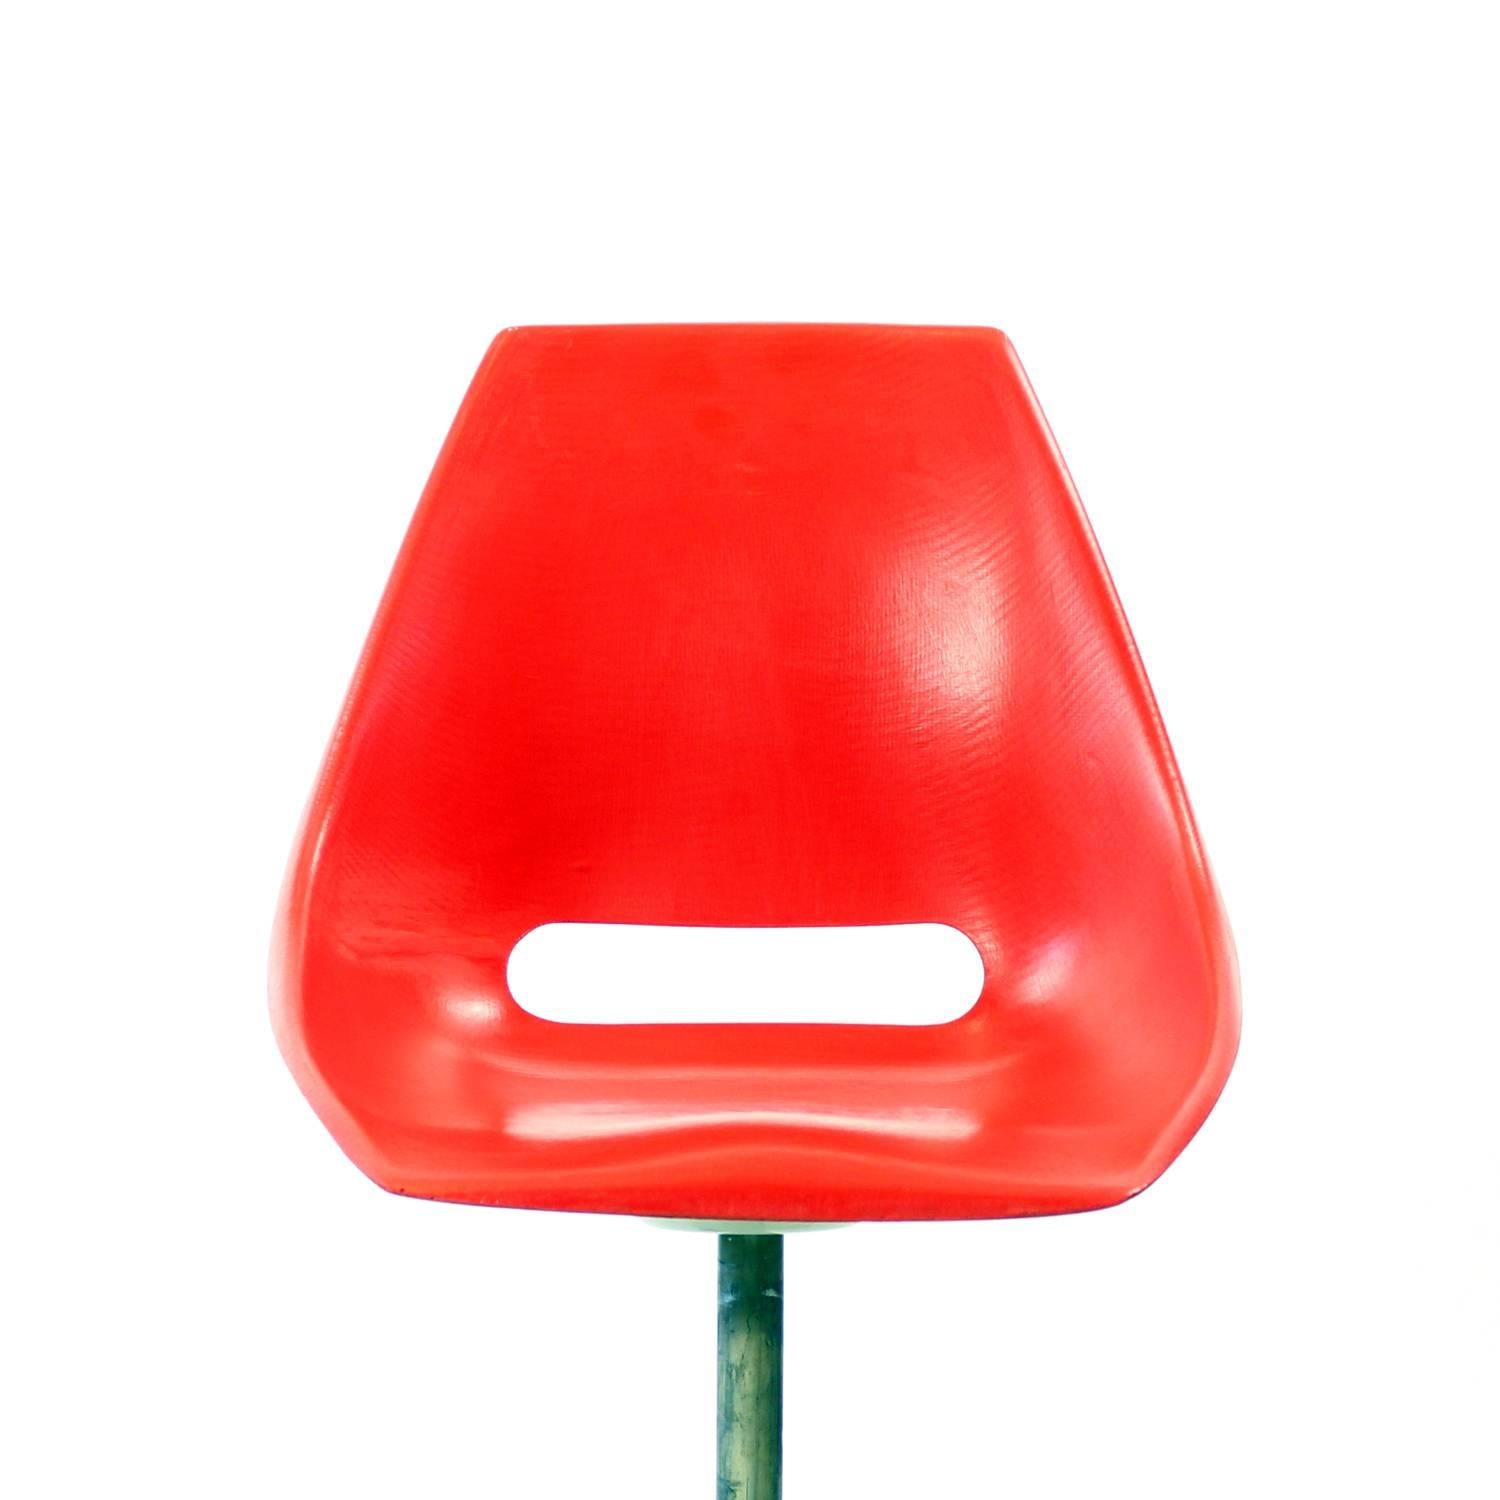 Beautiful, midcentury chairs in original red fiberglass. Designed by Miroslav Navratil for Vertex company. The seat model was used in Czechoslovakian trams. this model has different metal base and is ment as a factory chair. Industrial model with